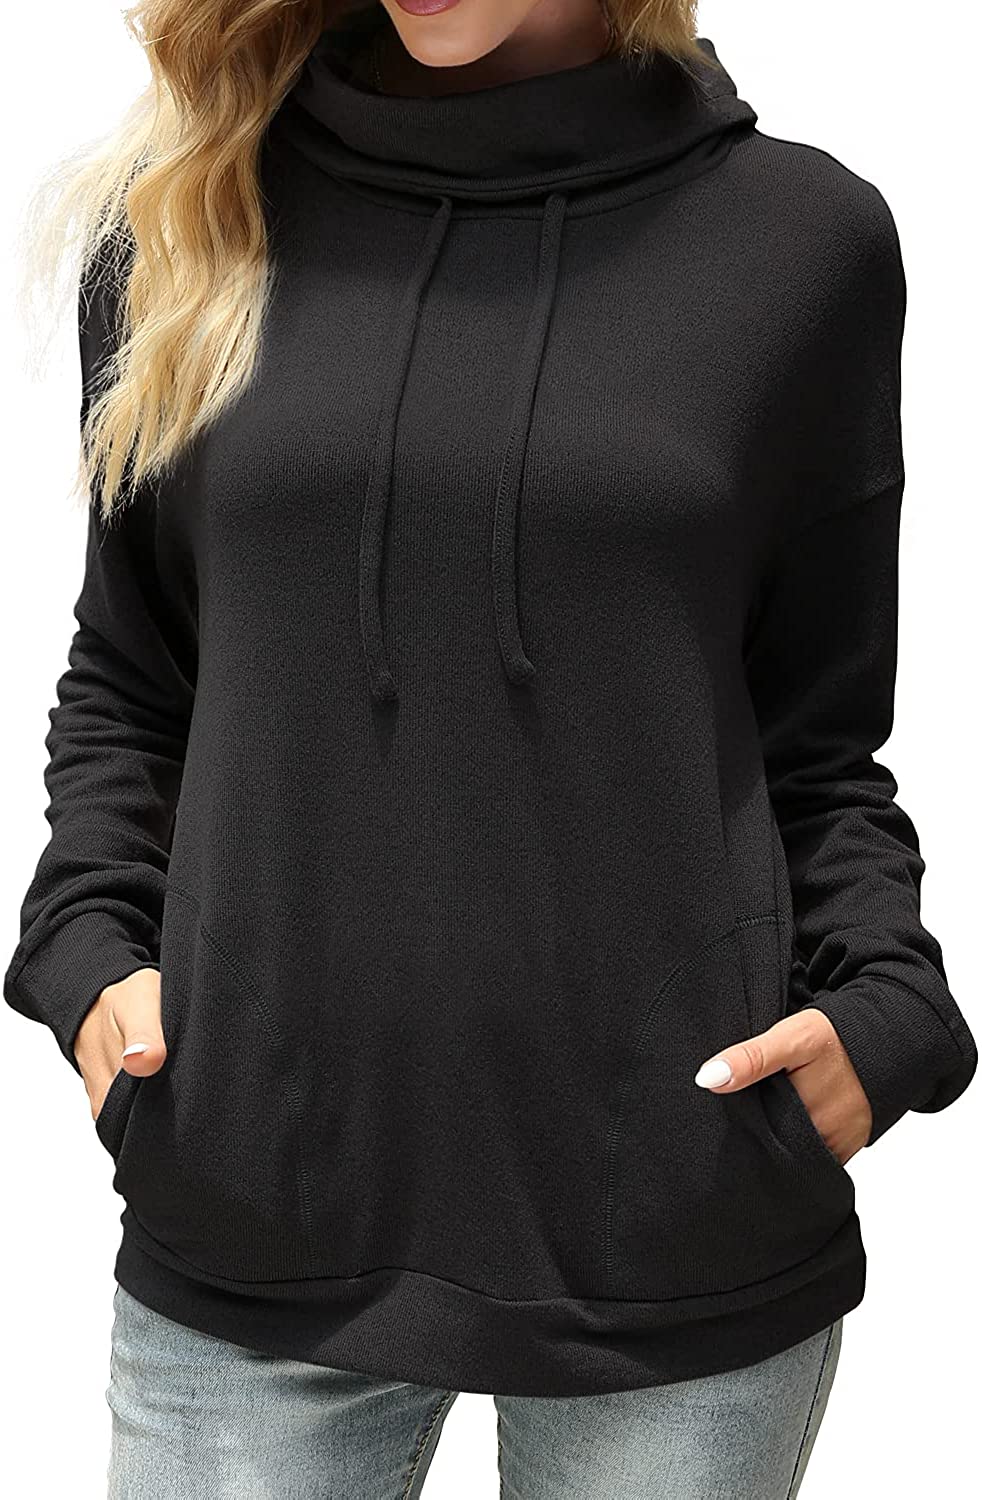 Davenil Women's Sweatshirts with Pocket Cowl Neck Sweaters Long Sleeve Pullover Casual Loose Tops with Drawstring